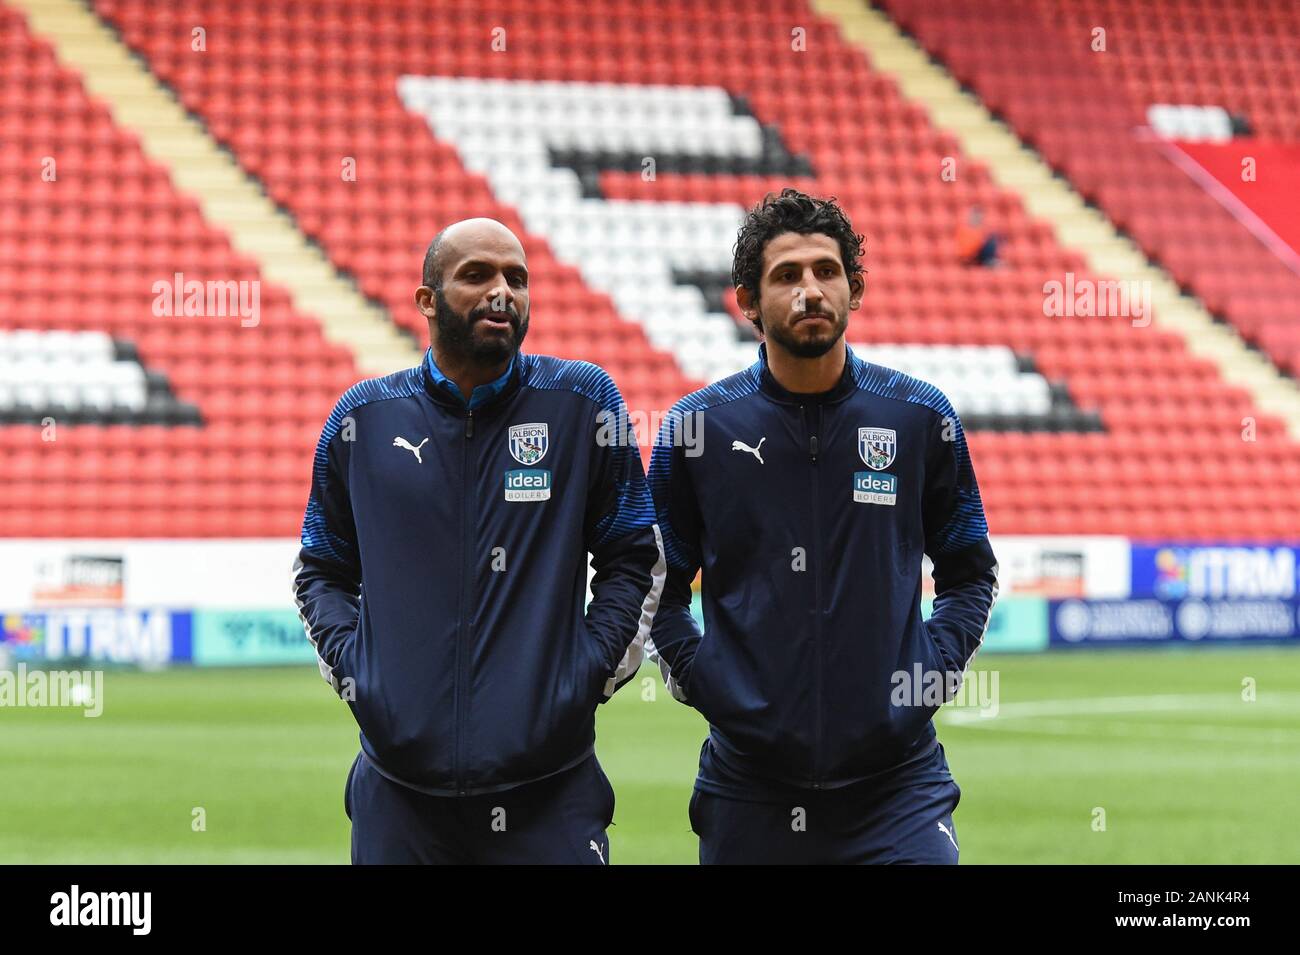 11th January 2020, The Valley, London, England; Sky Bet Championship, Charlton Athletic v West Bromwich Albion :West Brom players pitch side before KO Credit: Phil Westlake/News Images Stock Photo